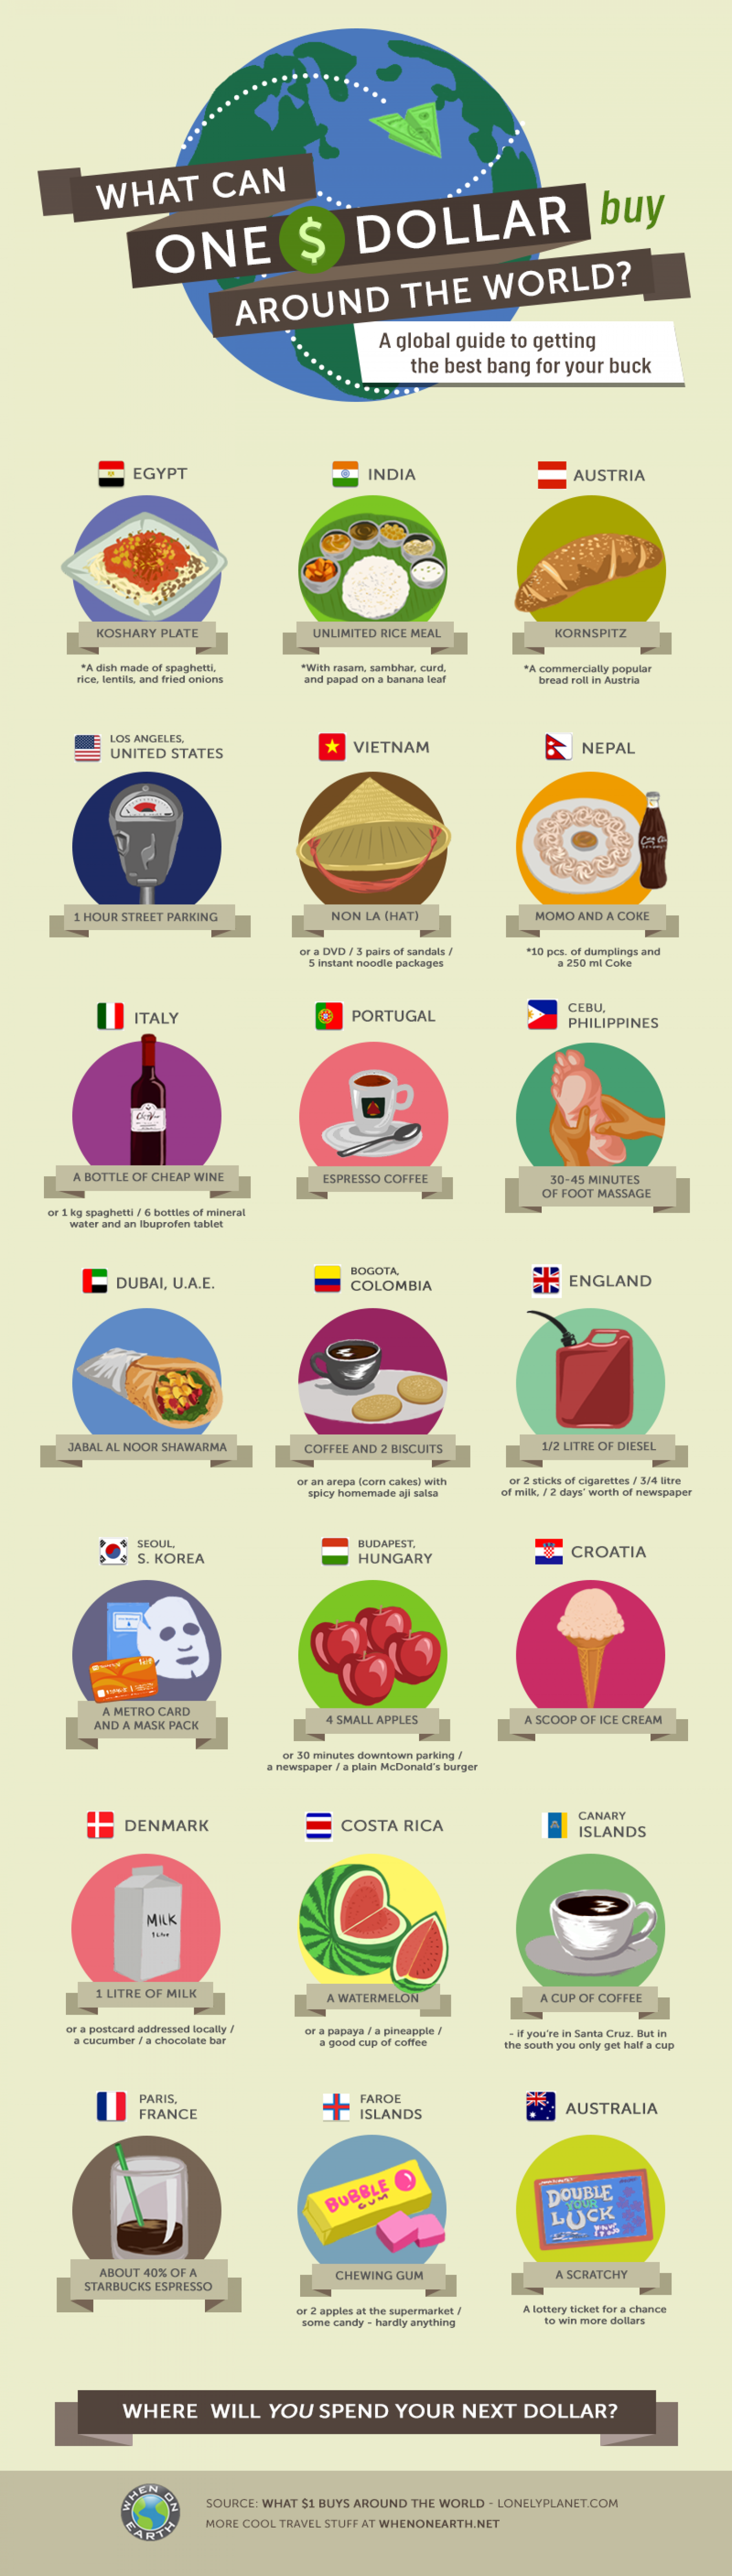 What can $1 buy around the world?